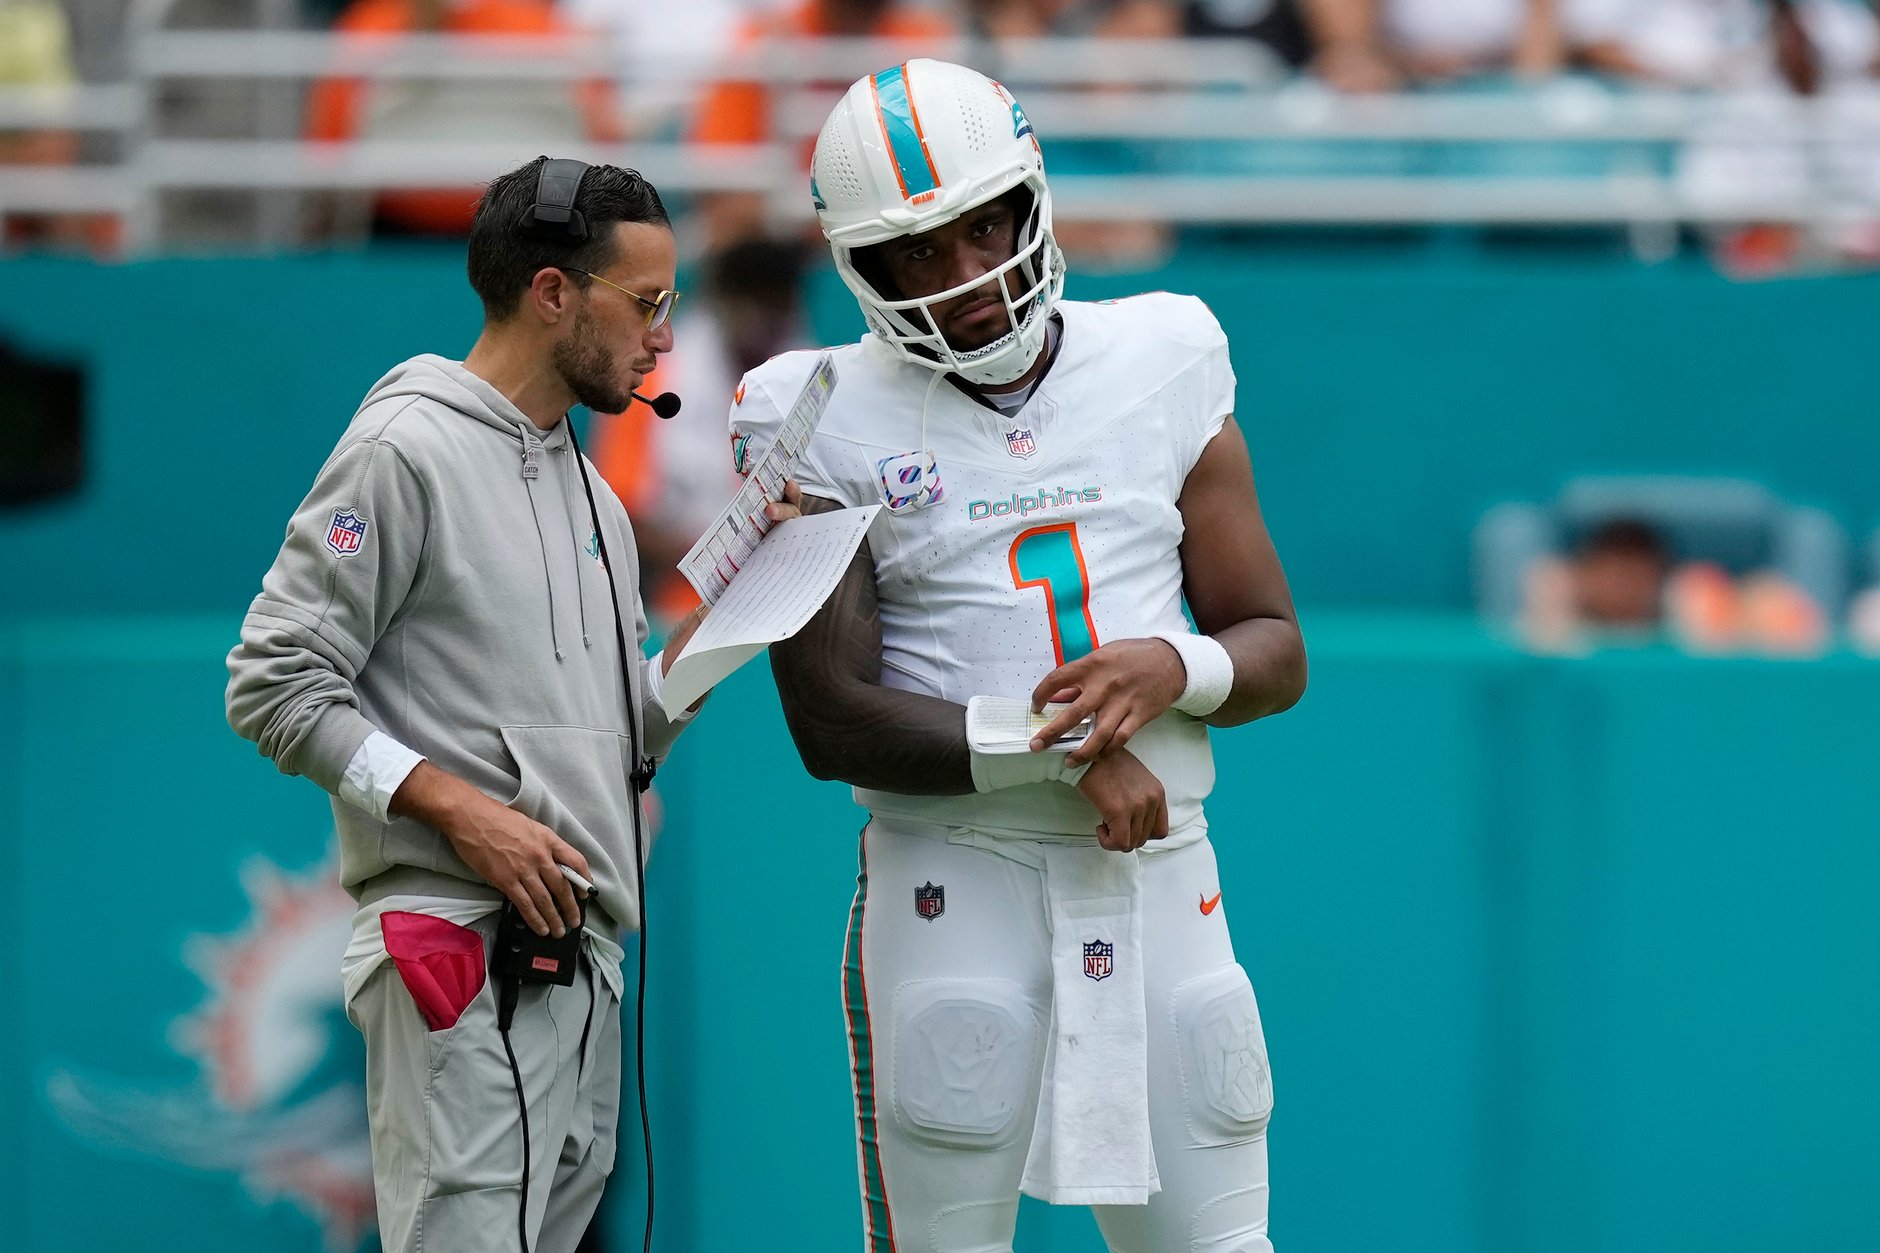 The Dolphins and the 49ers are off to record-threatening offensive starts